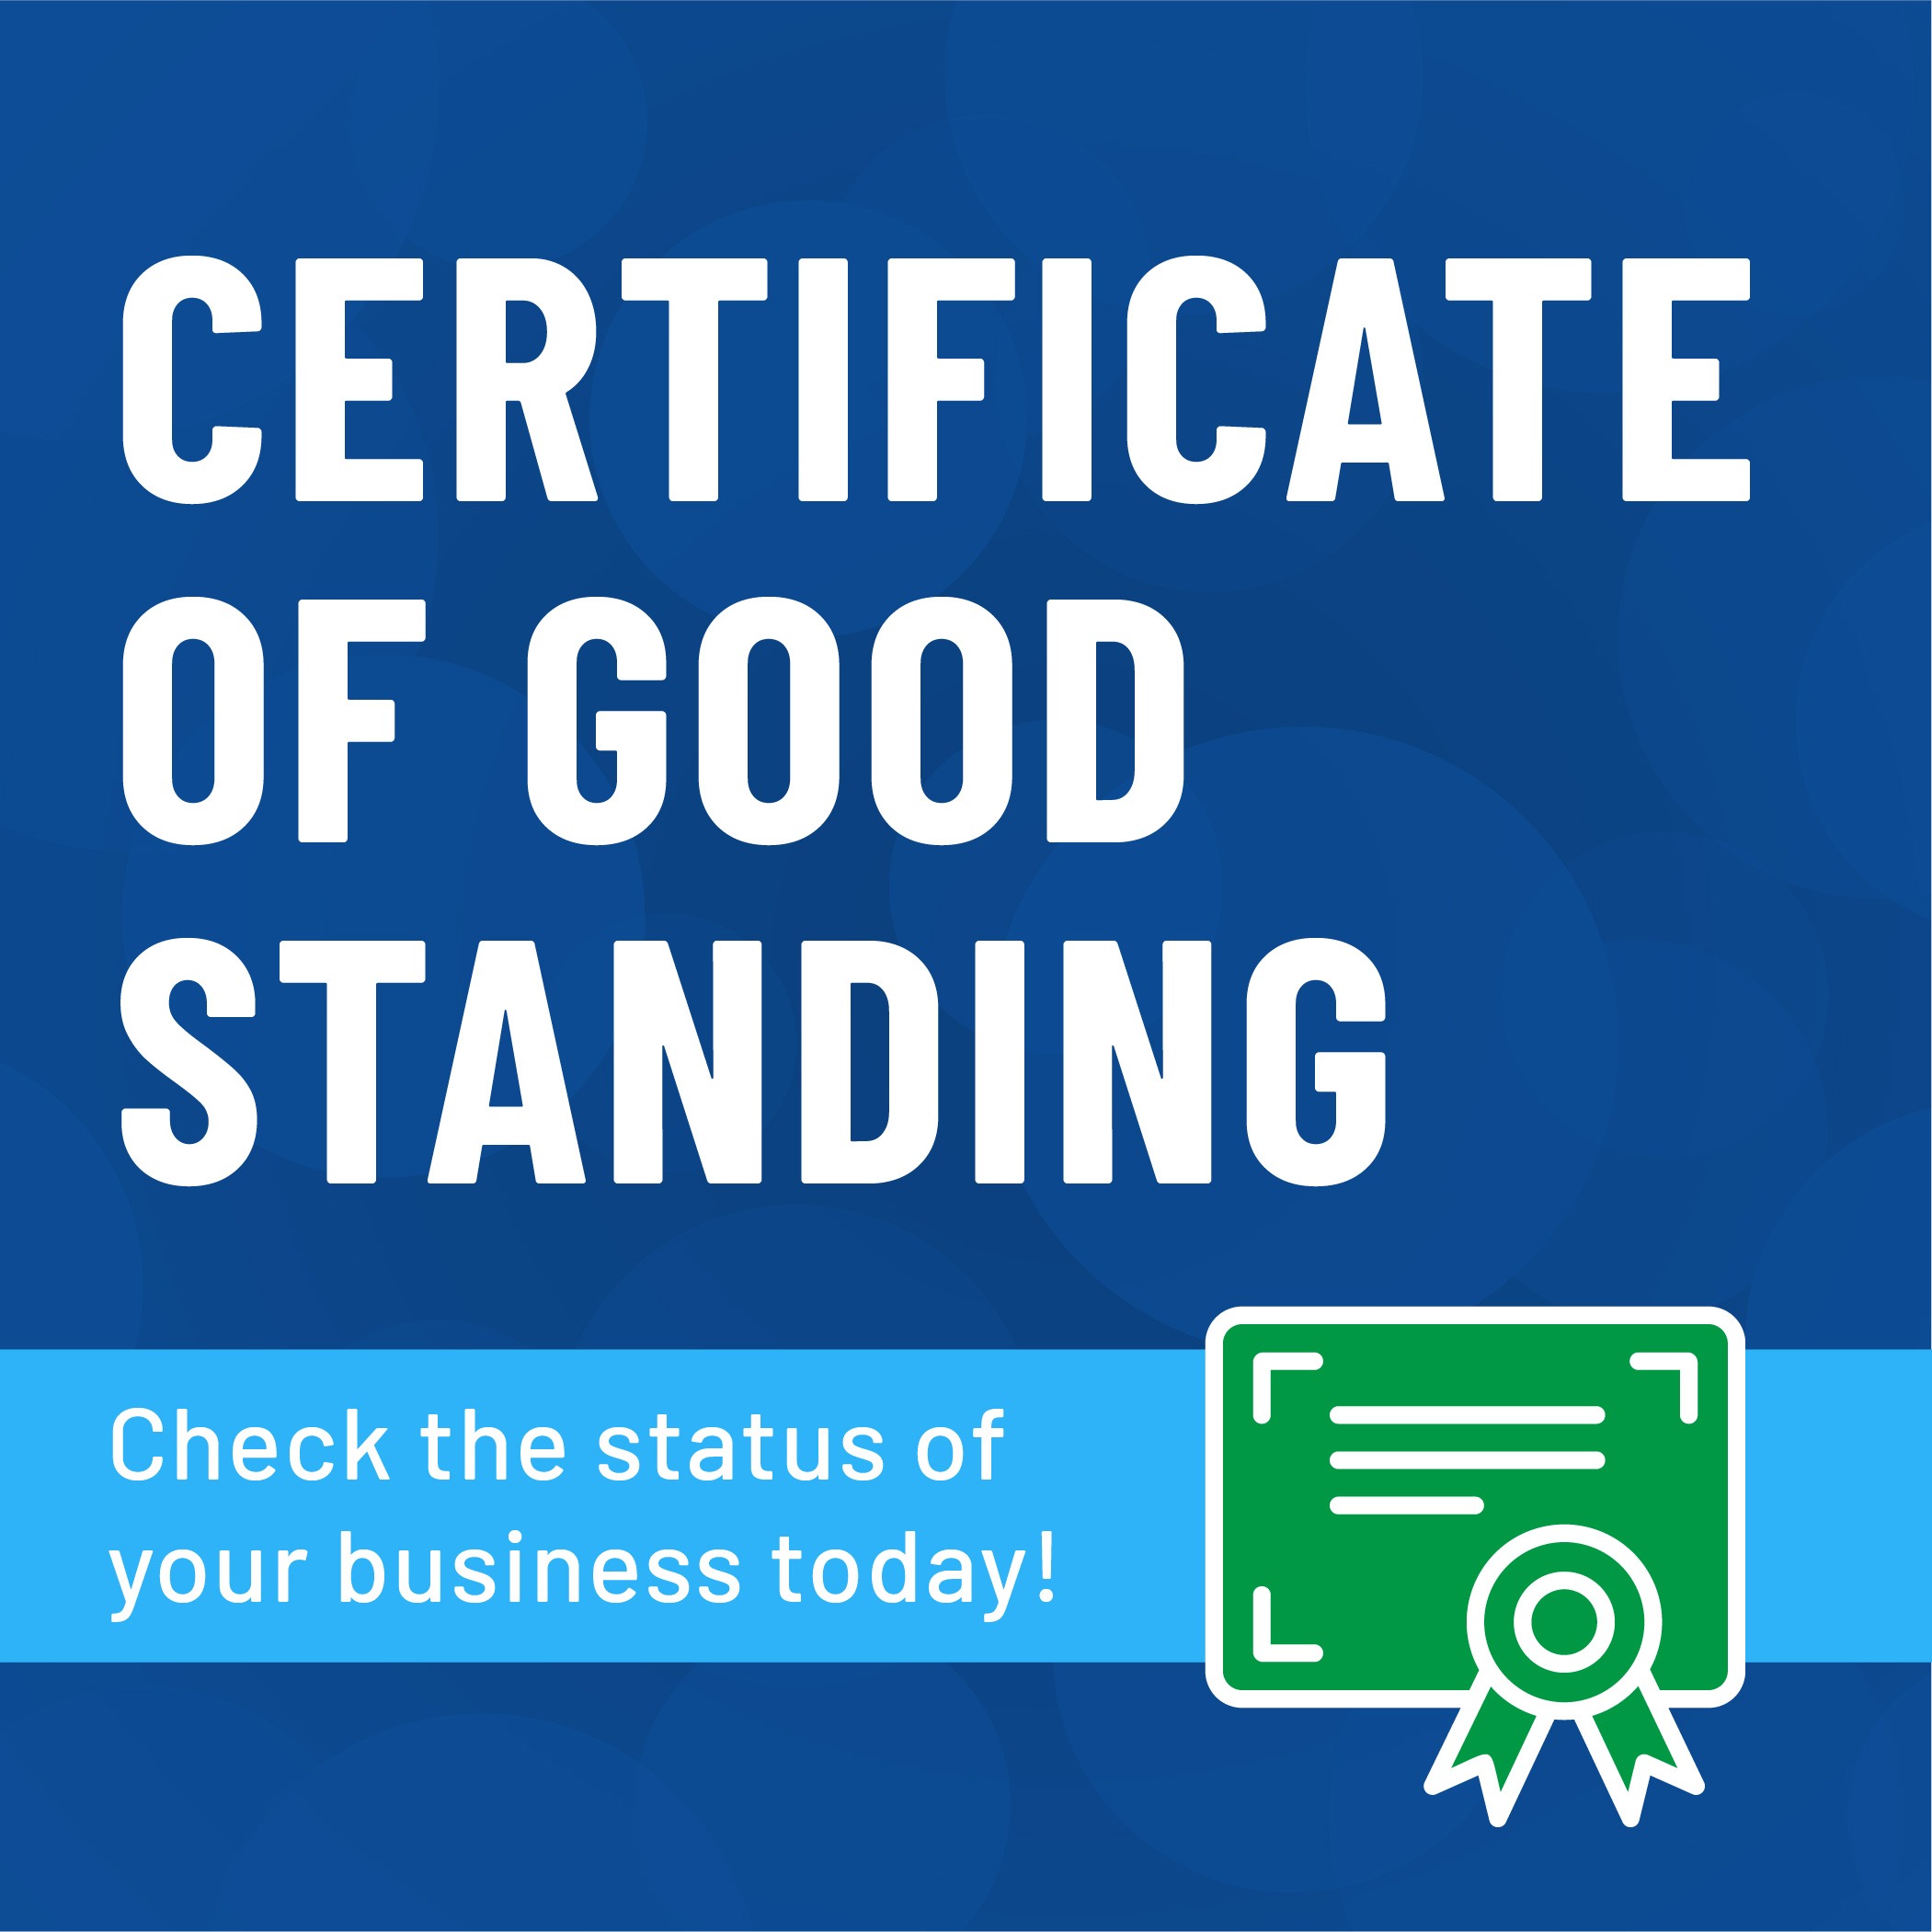 Check Your Certificate of Good Standing Status Today!